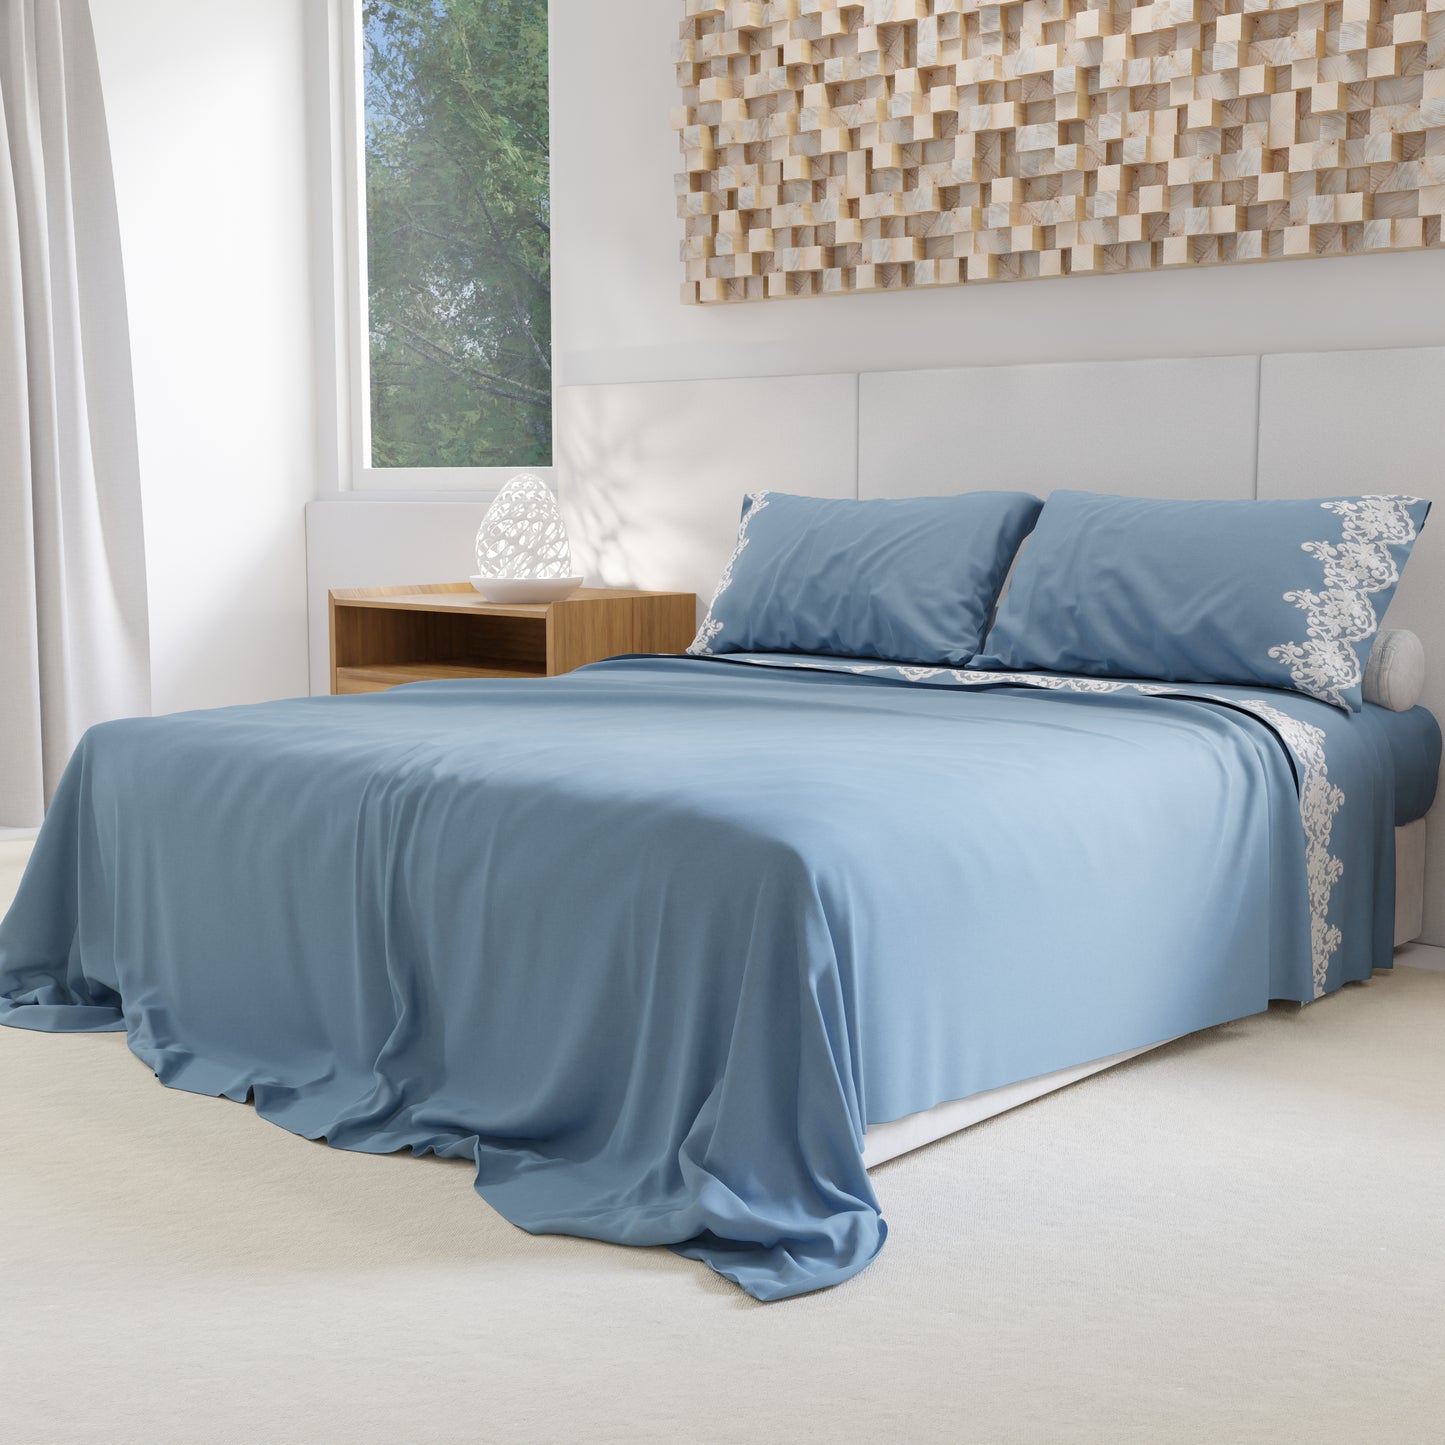 Percale Sheets with Lace, Light Blue Cotton Double Sheets